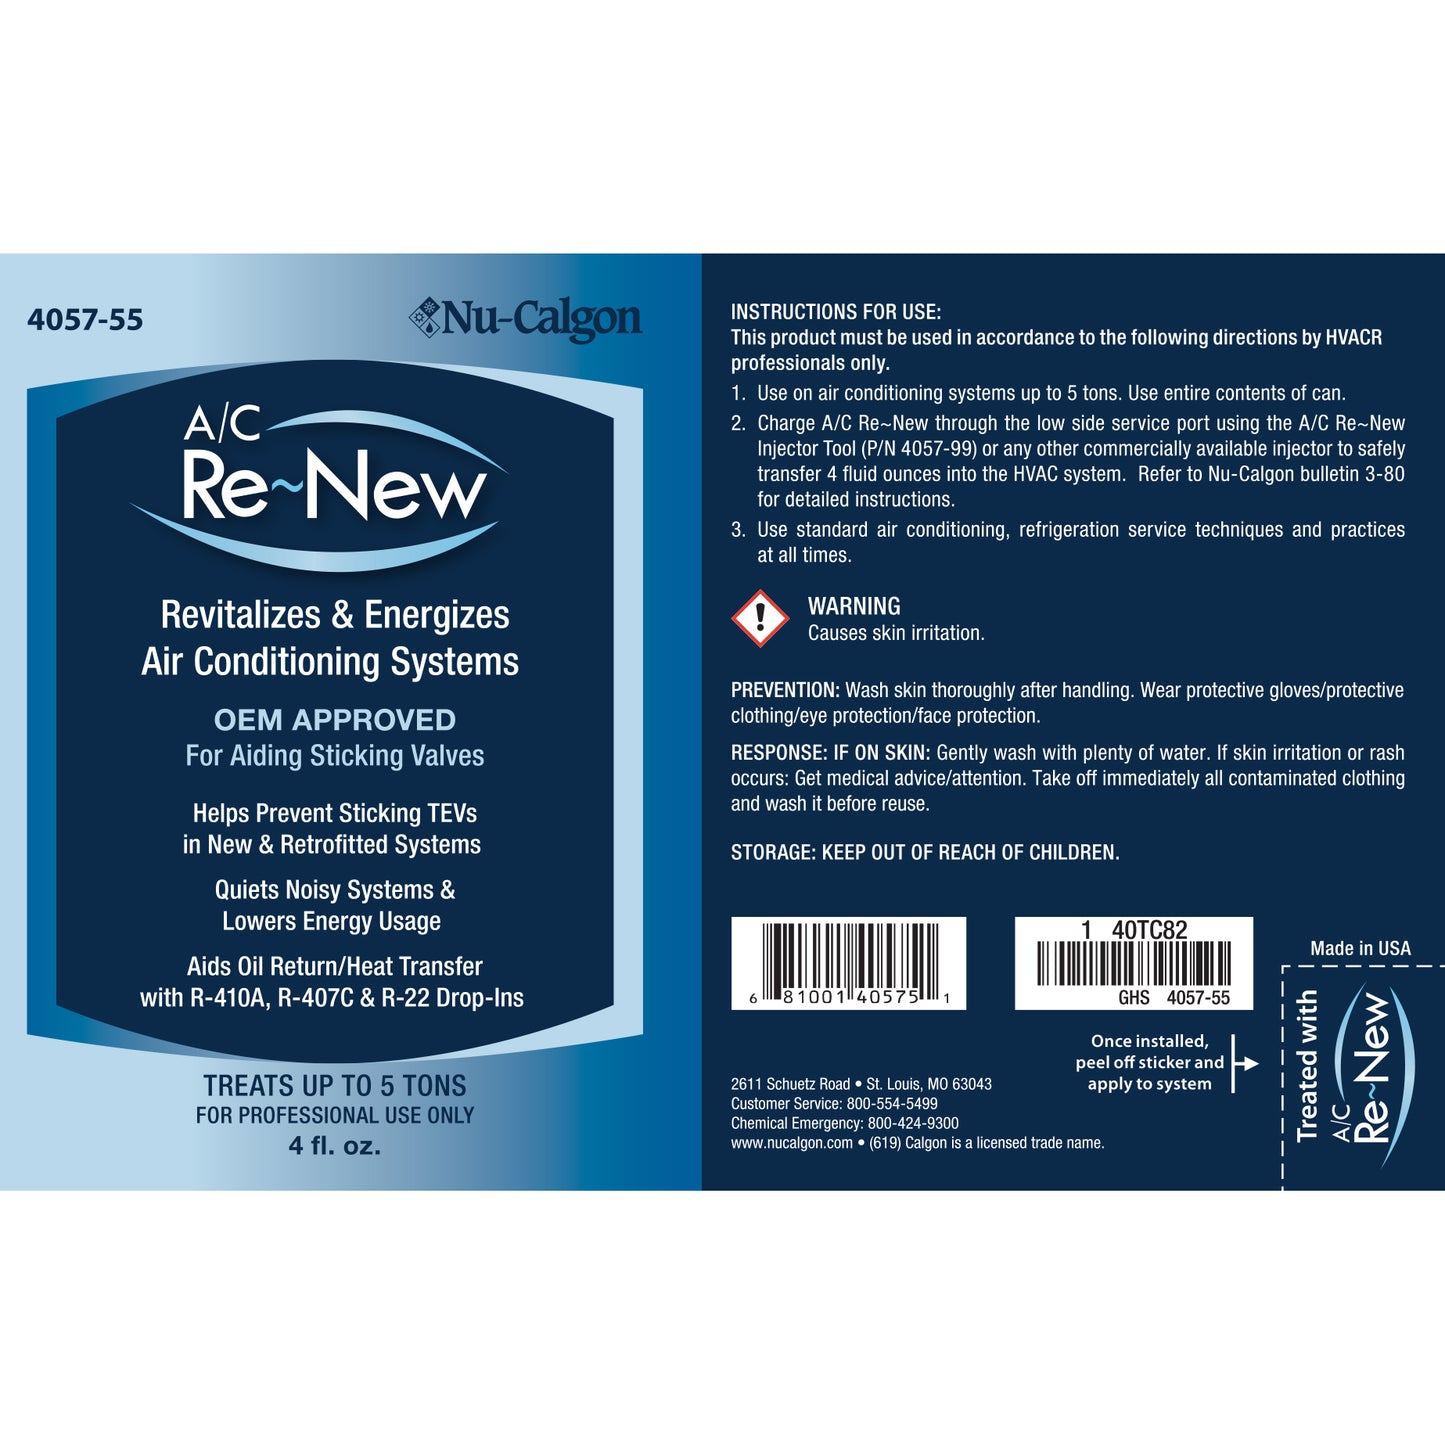 4057-55 - A/C Re-New Revitalizes & Energizes Air Conditioning Systems - 4 oz